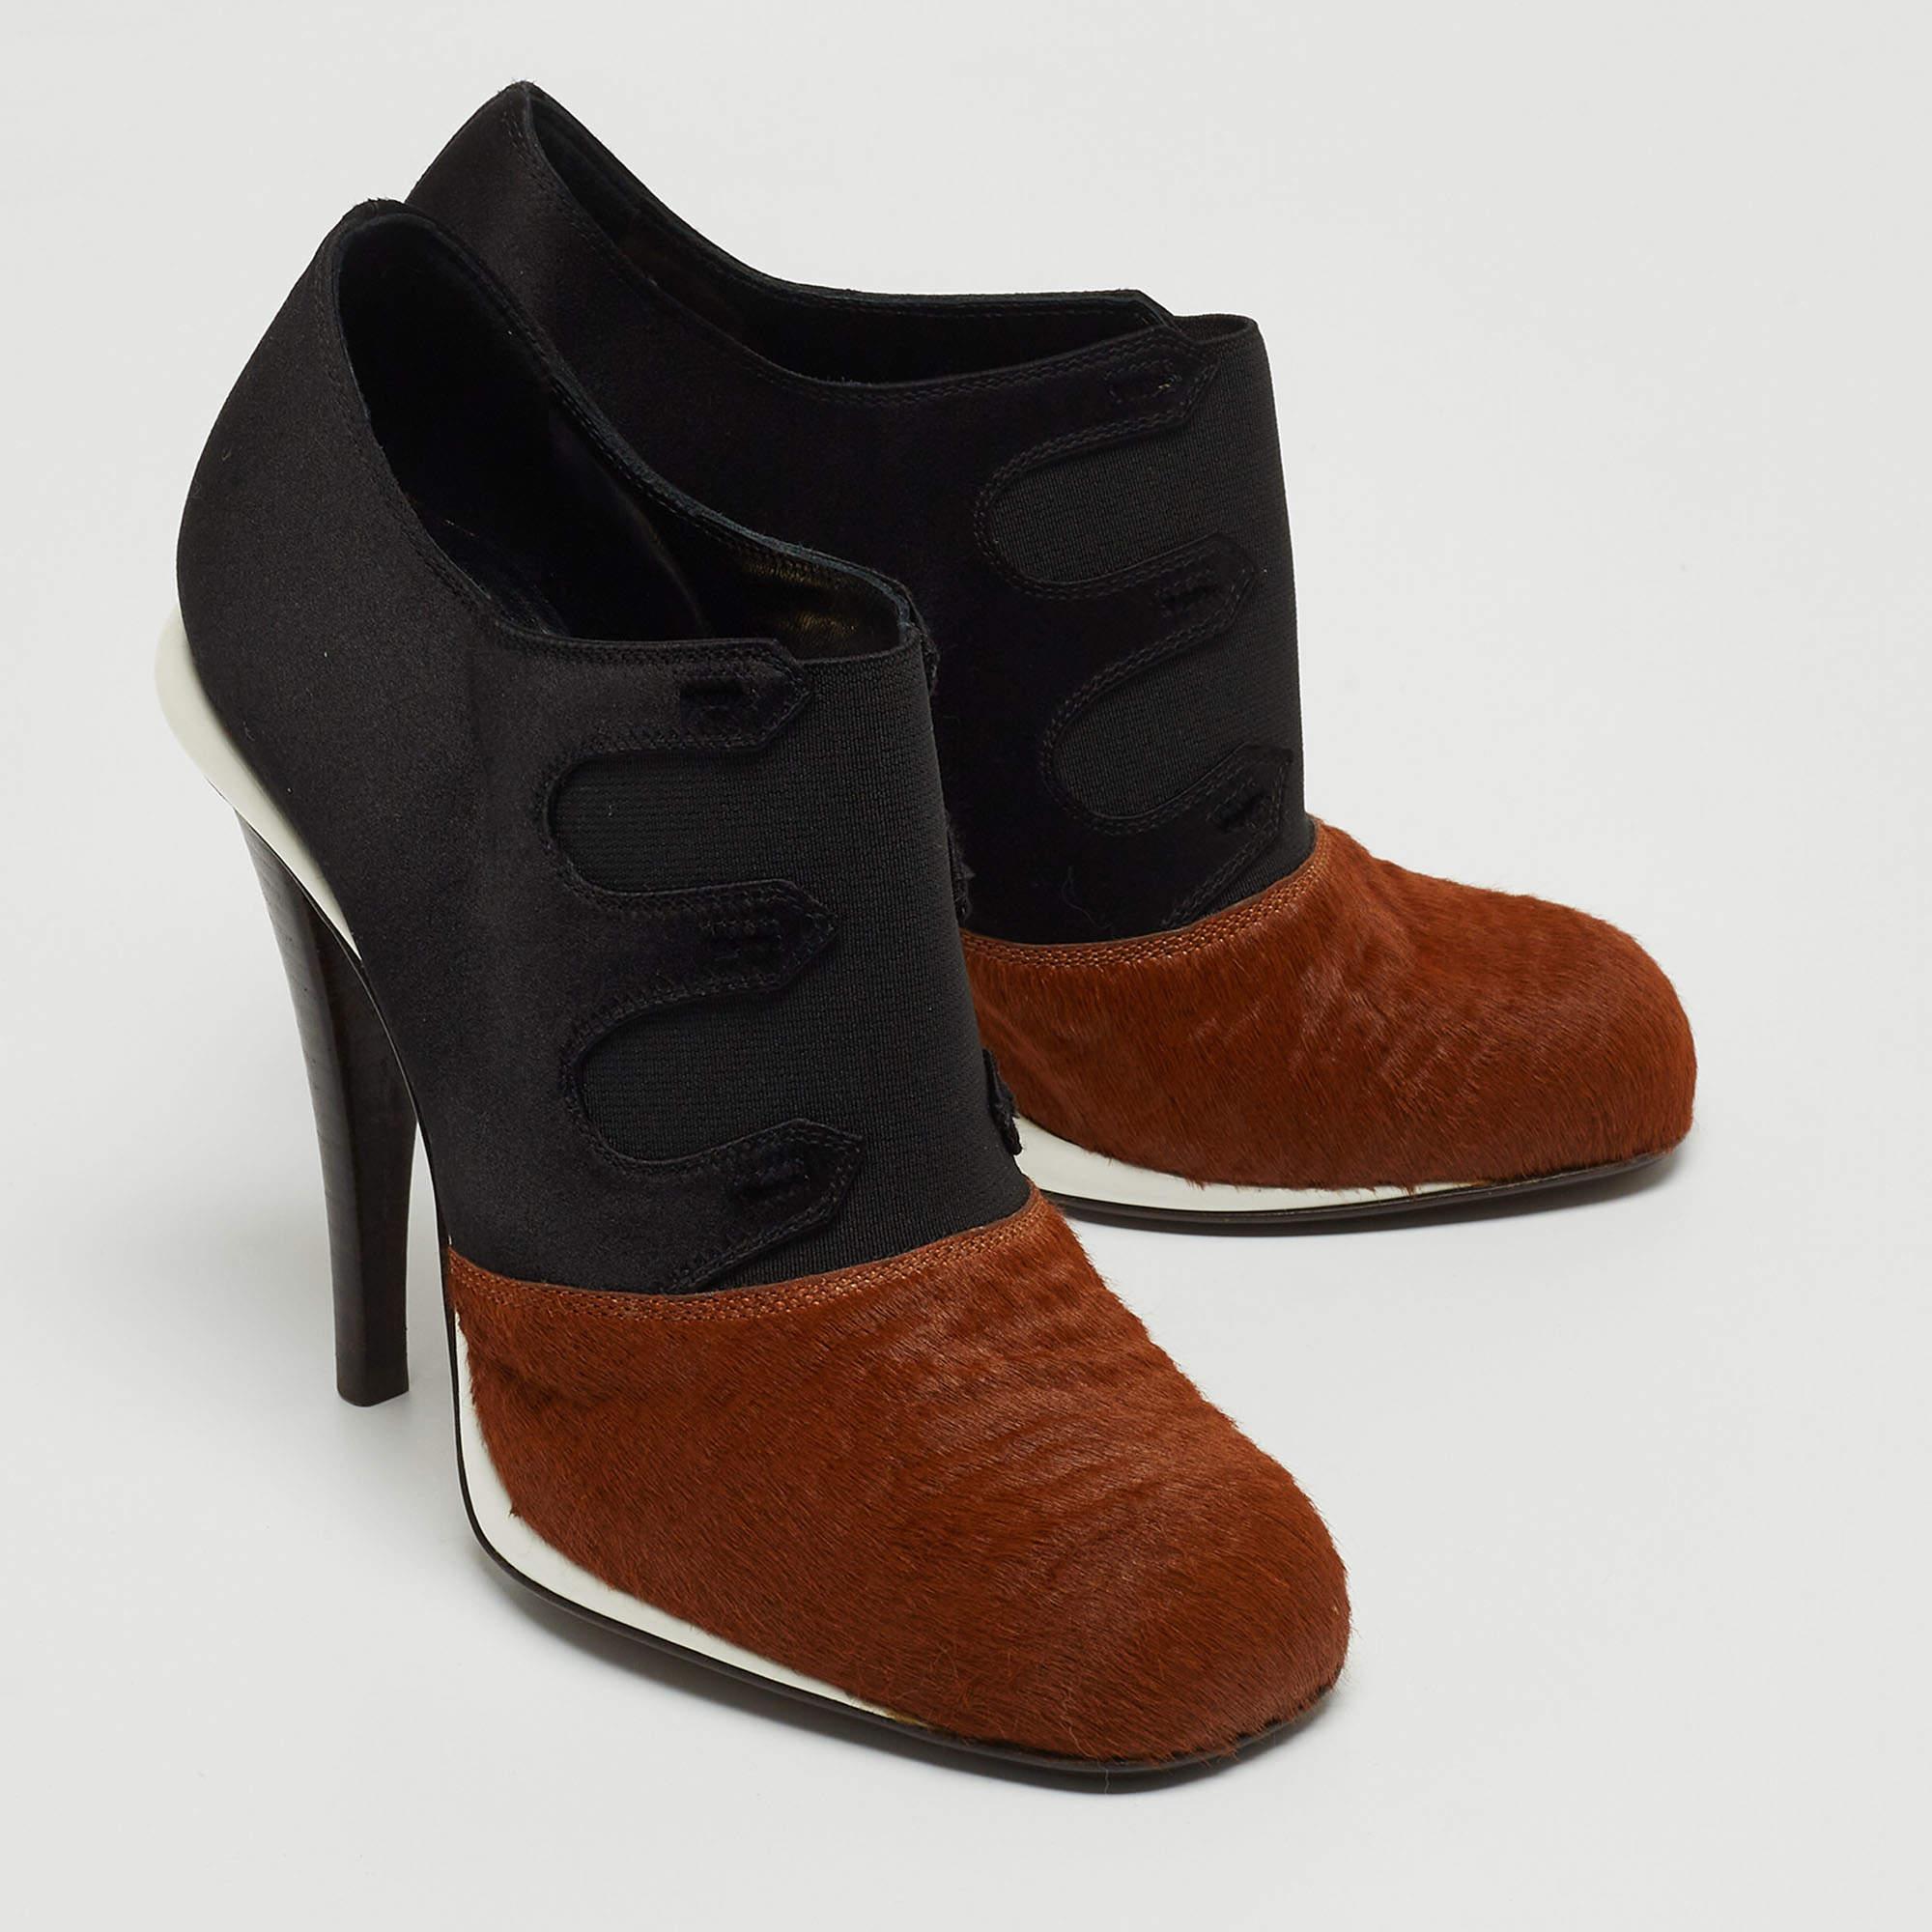 Fendi Brown/Black Calf Hair and Satin Ankle Booties Size 37 In Good Condition For Sale In Dubai, Al Qouz 2